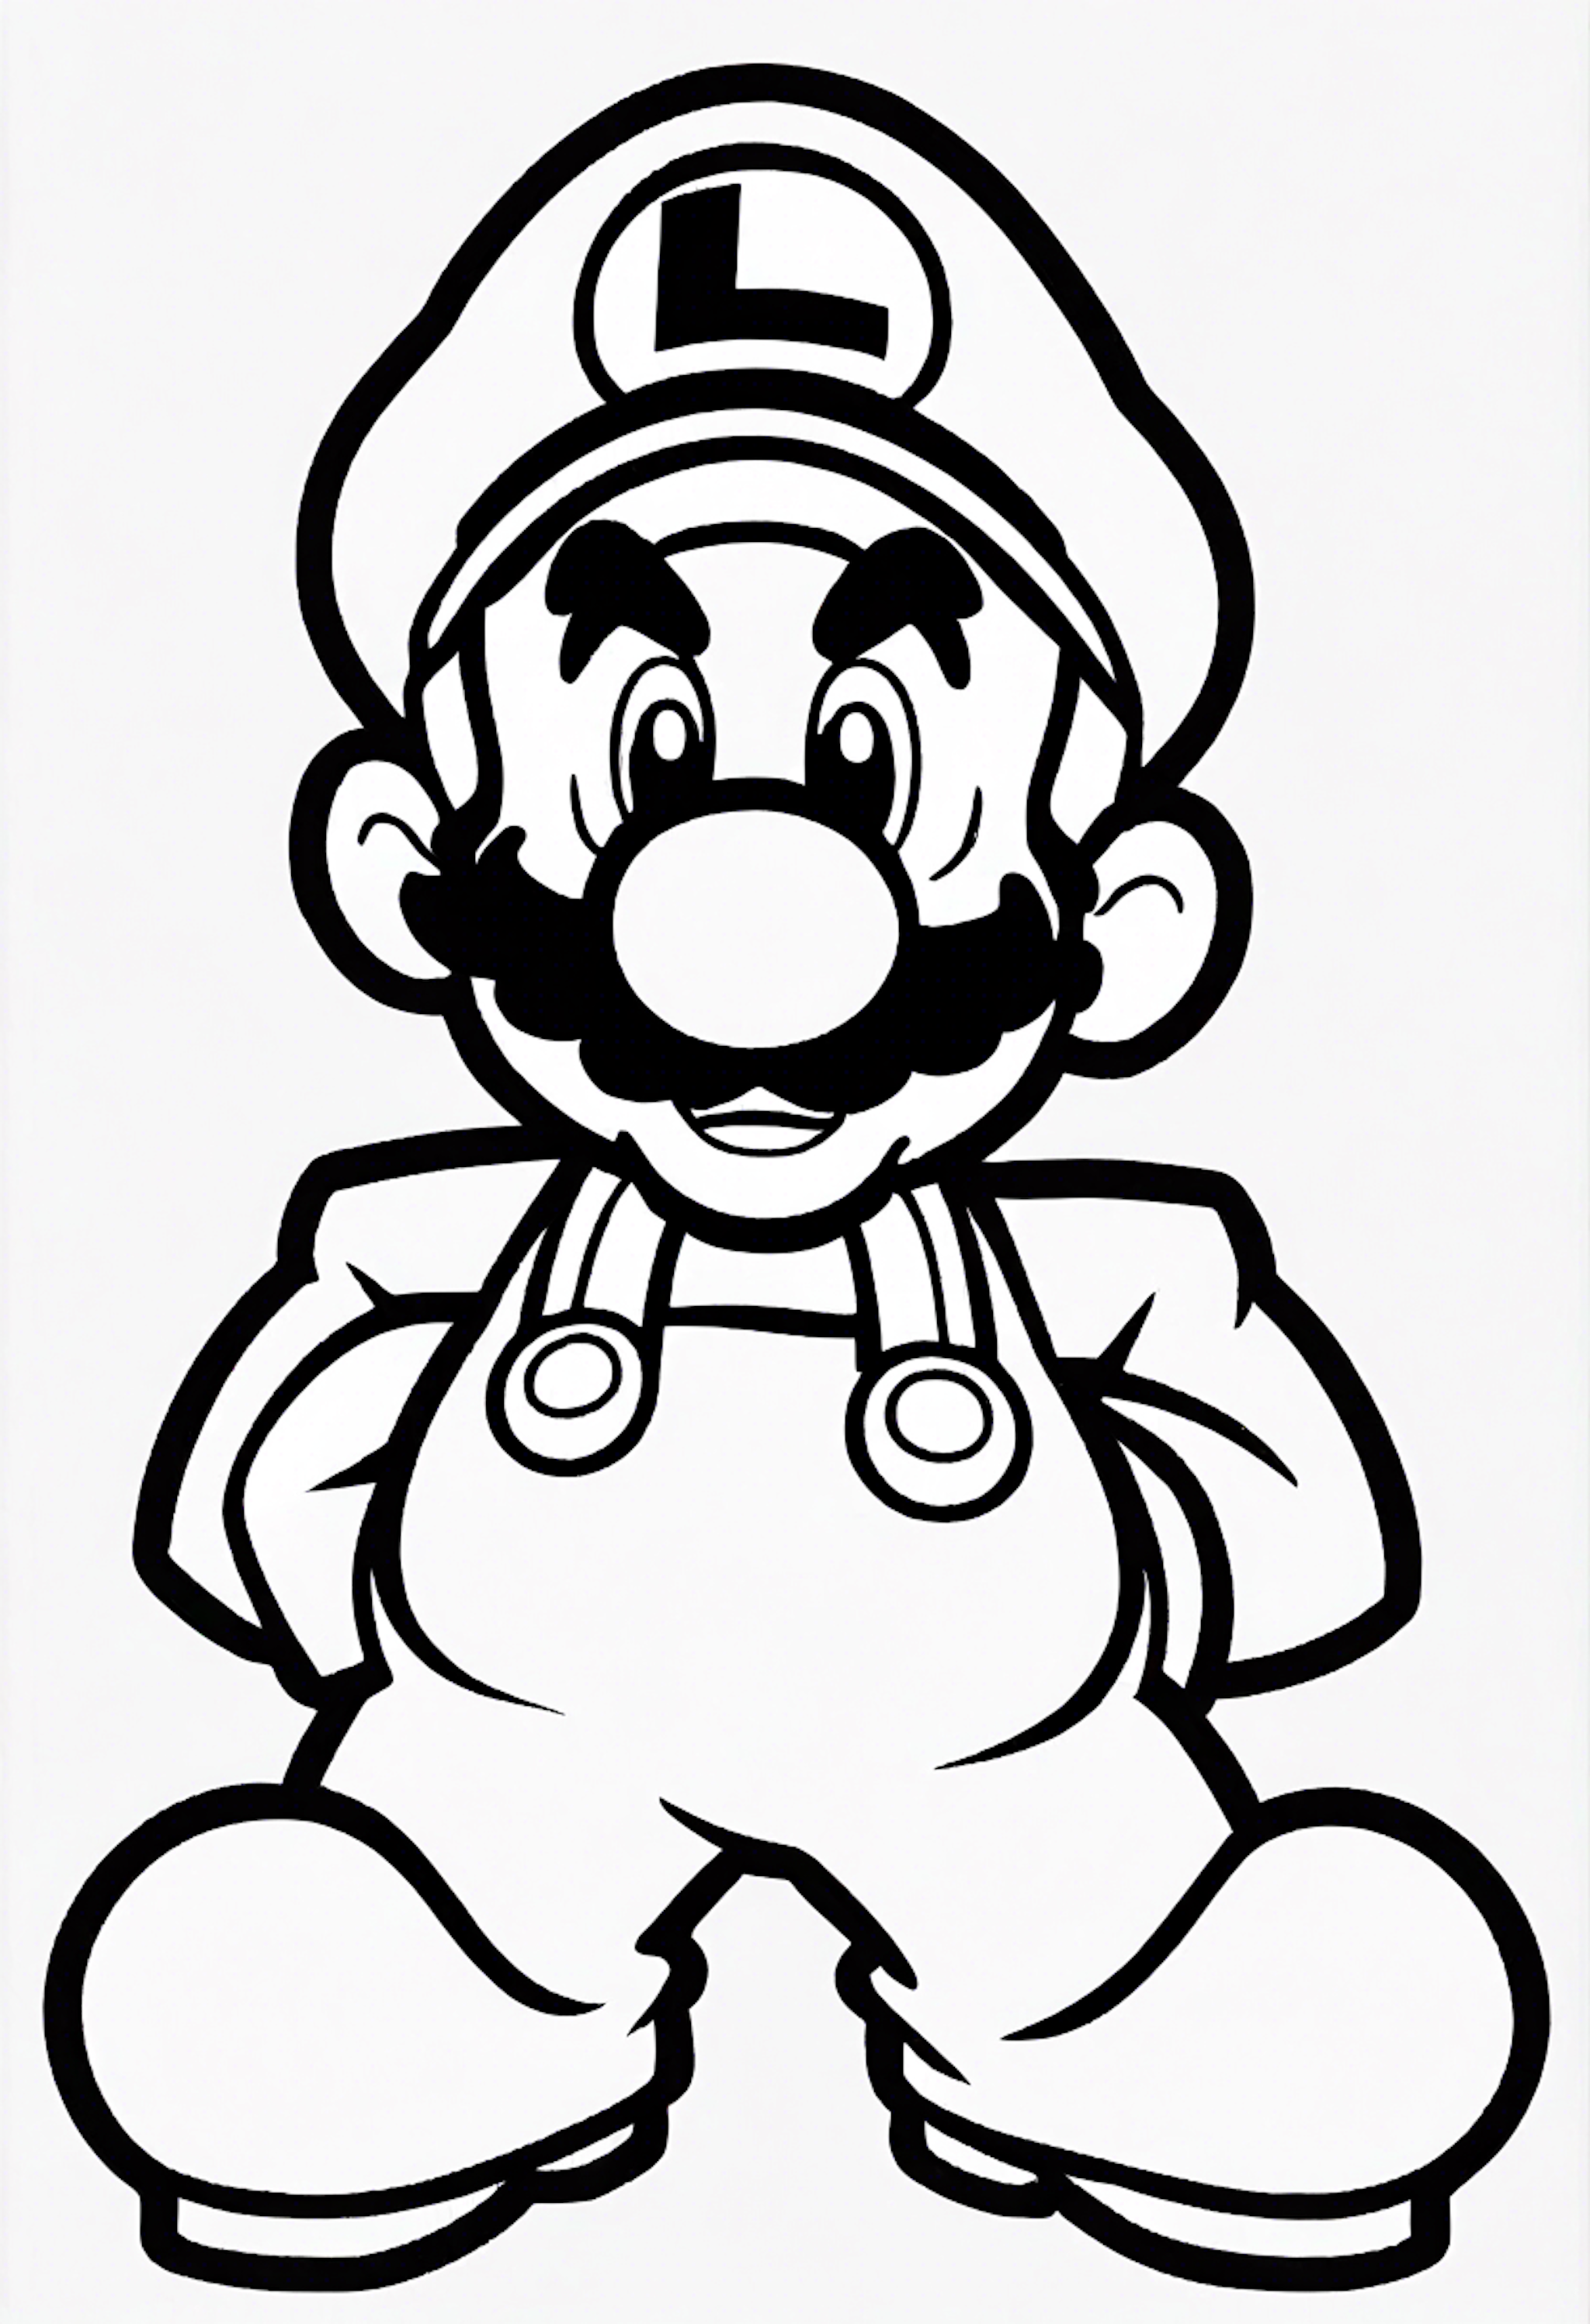 A coloring page for 1 Luigi coloring pages